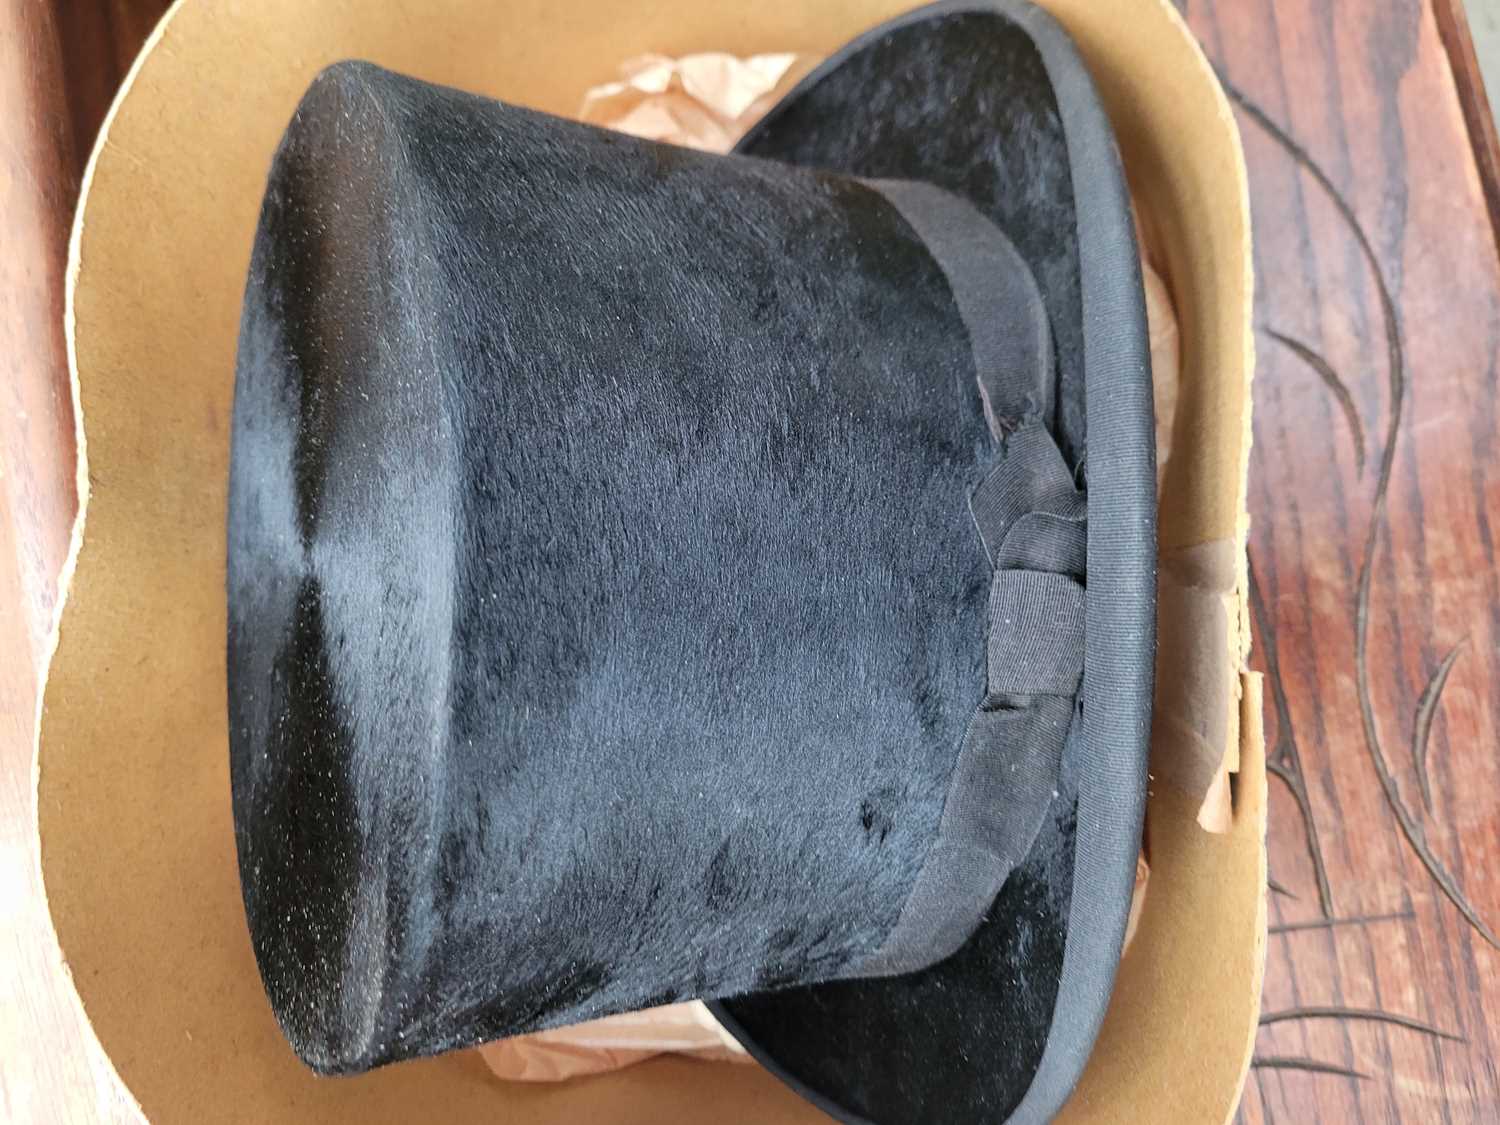 Top hat and gloves Width: 6.5"Length: 8"Height: 6.5" External silk is in good condition - Image 2 of 3